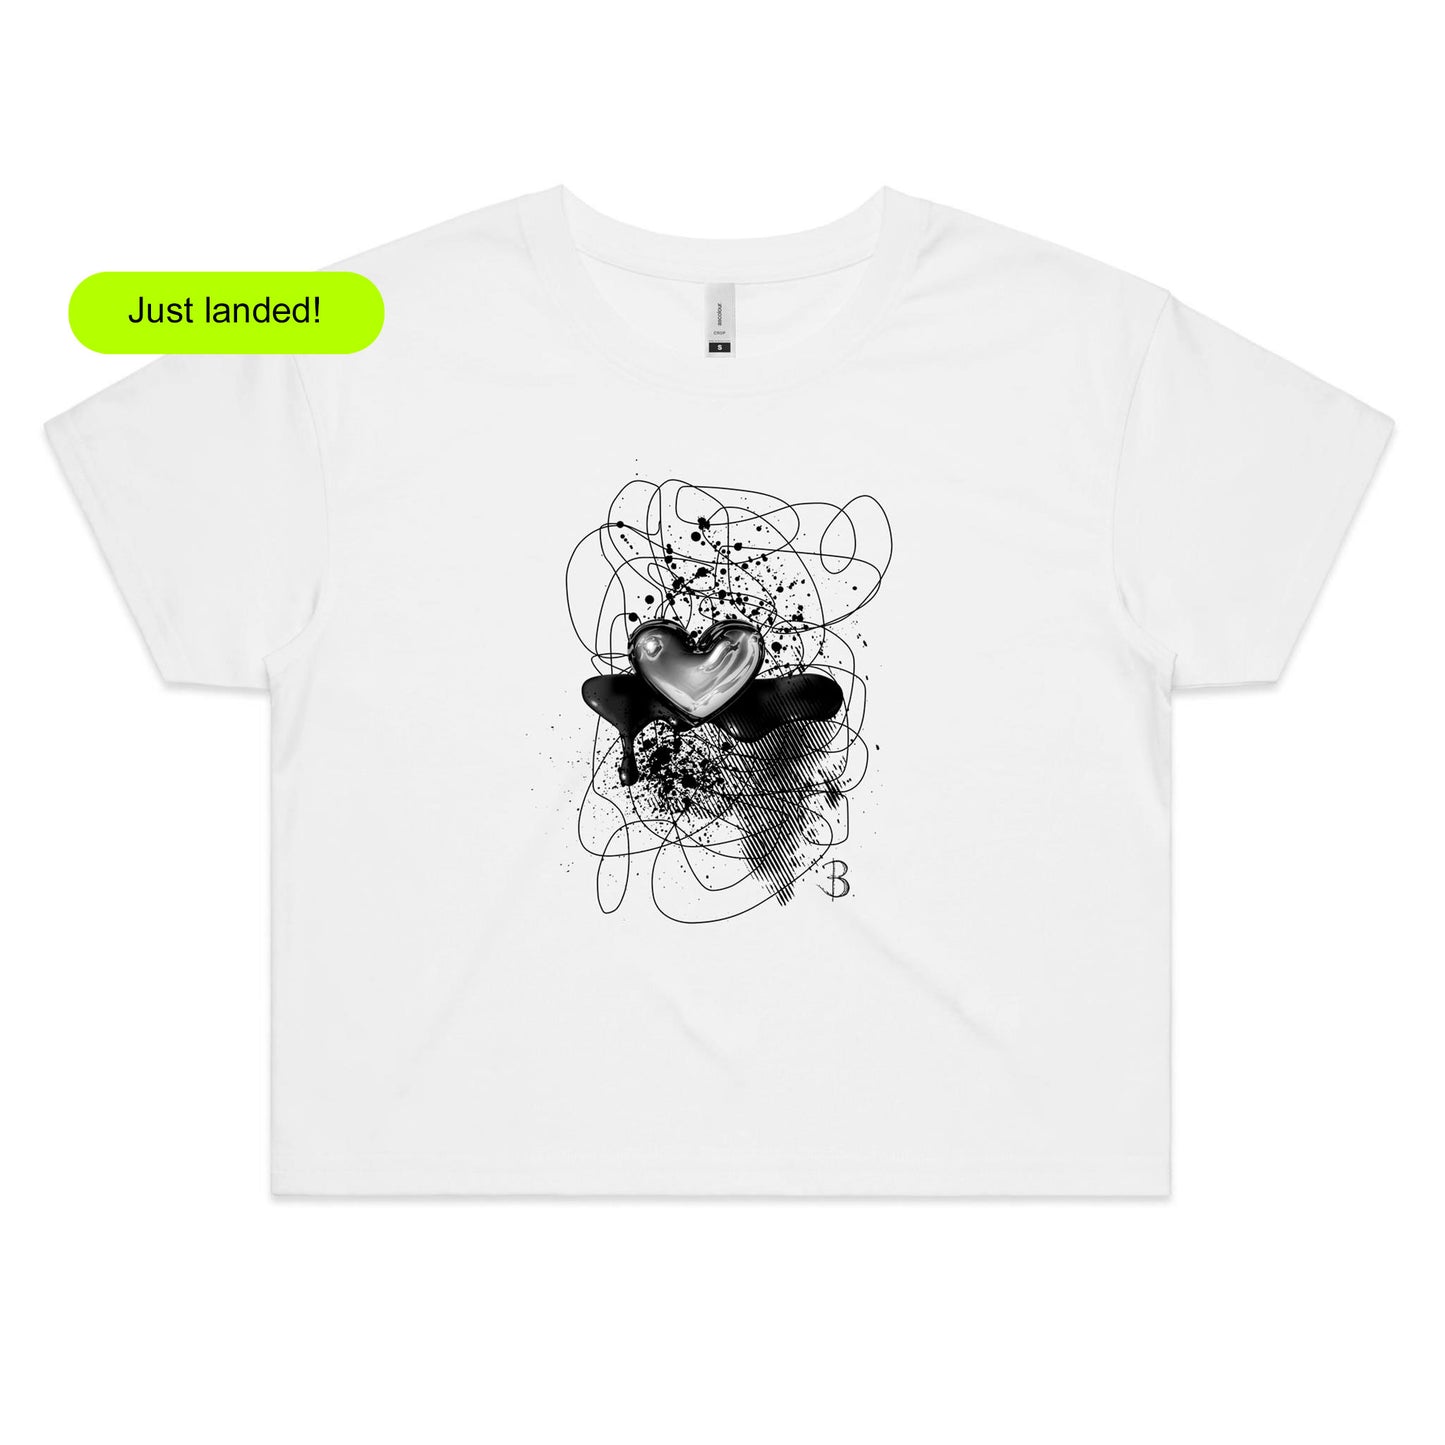 'Swatch Crop Top Tee Black Heart' , White 100% Cotton Crop Top with Front Print., Exclusive Graphic Tee Design by Bridget Bradley for B. Streetwear, Australia. Sizes XS-XL. Shop now!